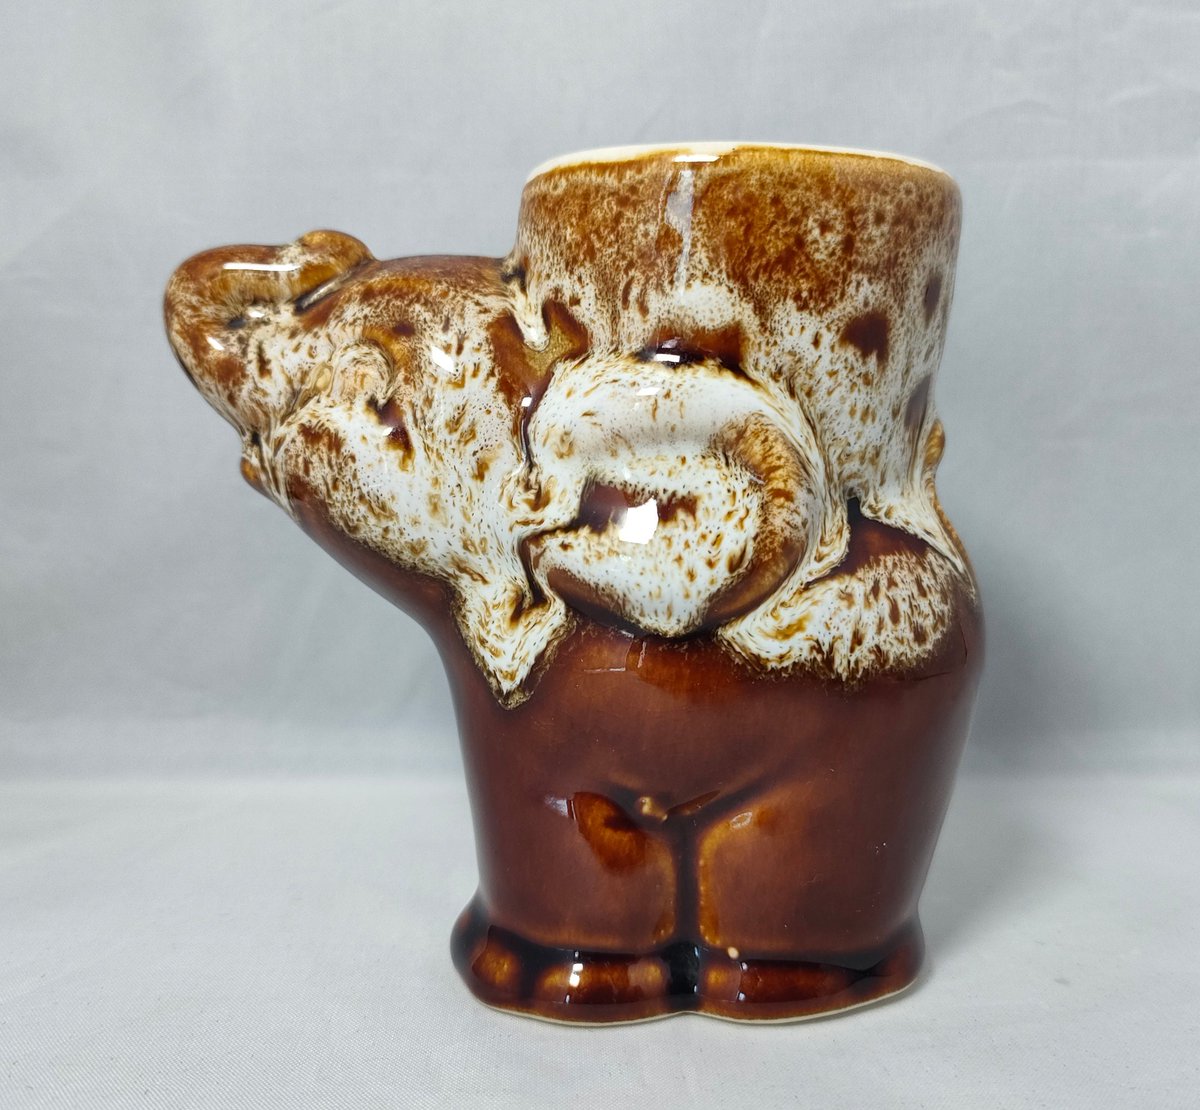 Excited to share the latest addition to my #etsy shop: Vintage Novelty Drip Ware Elephant Egg Cup etsy.me/43iXBUH #ceramic #elephanteggcup #collectableeggcup #dripware #silverdragonfinds